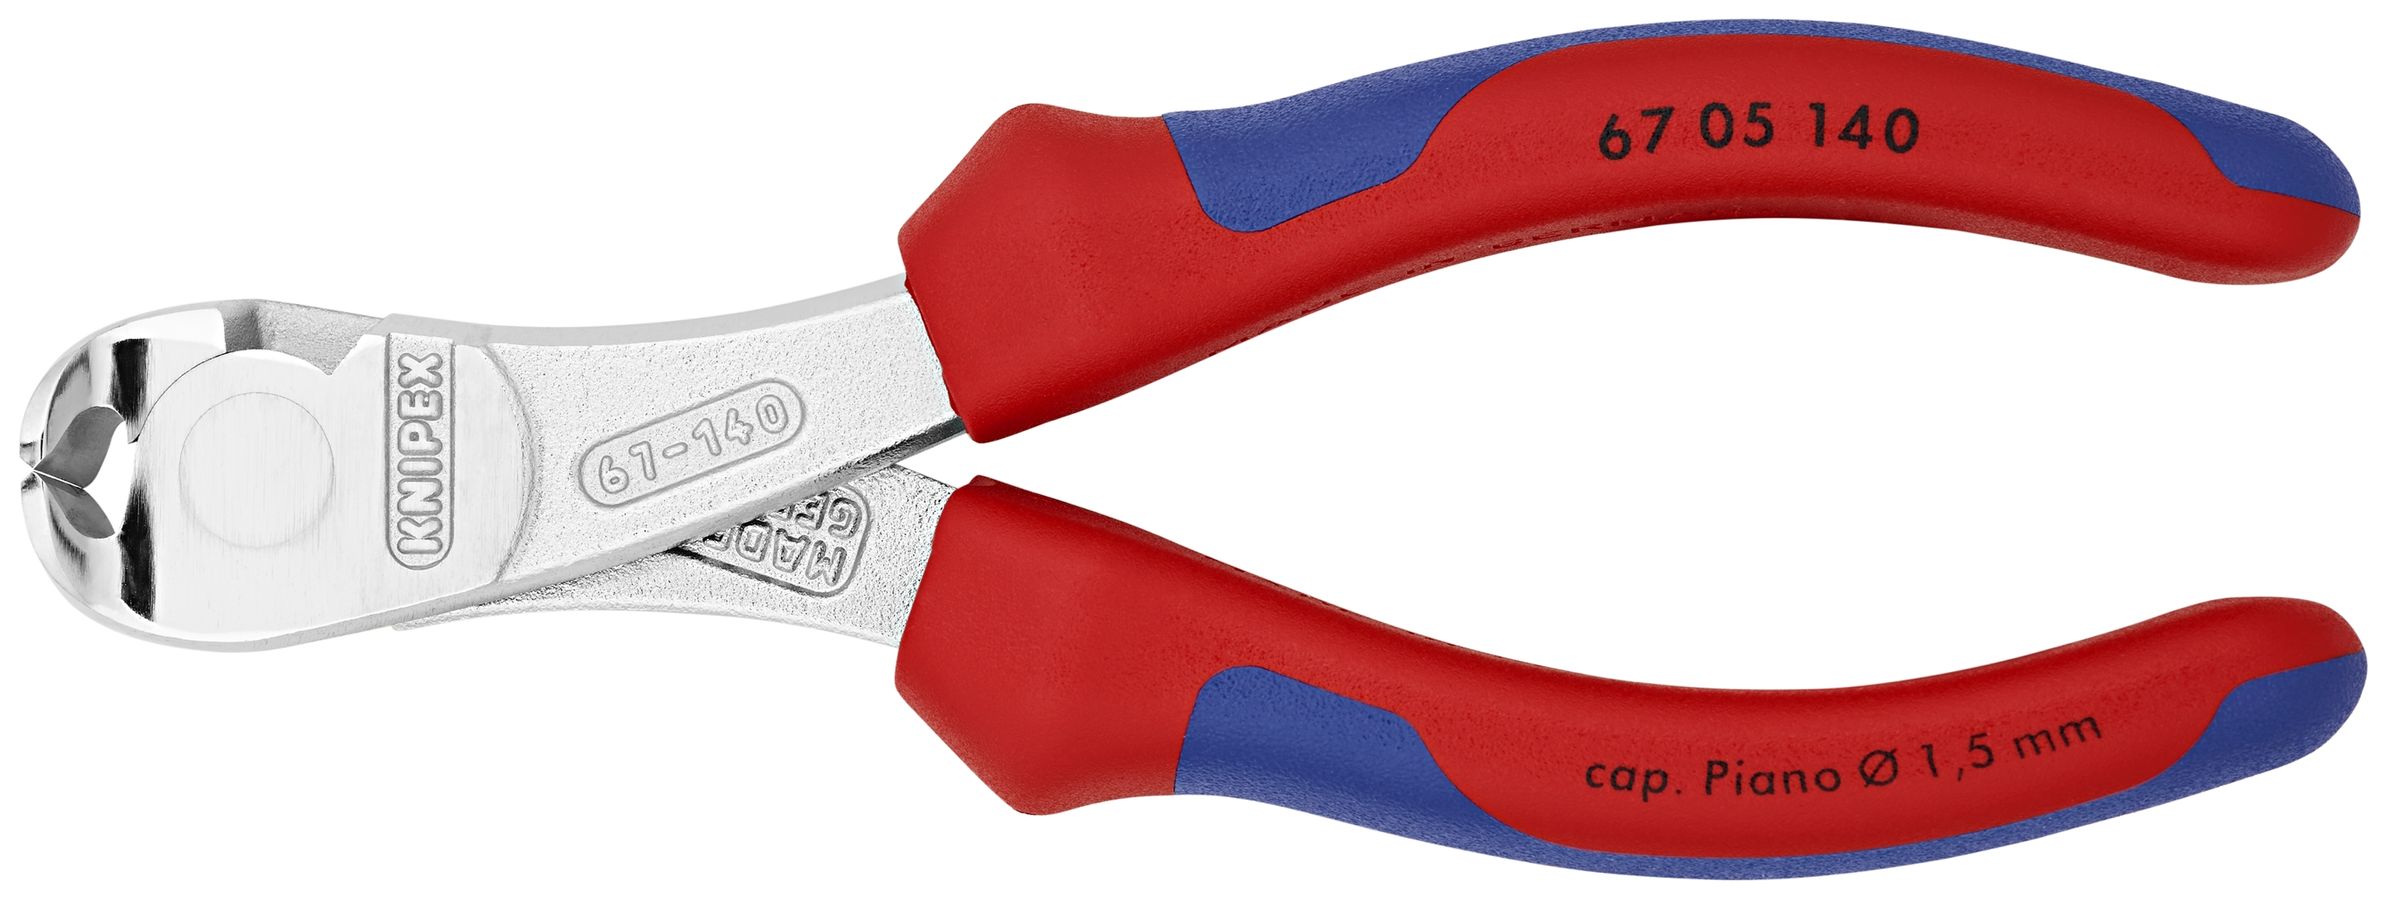 Leverage End Cutting Nippers |